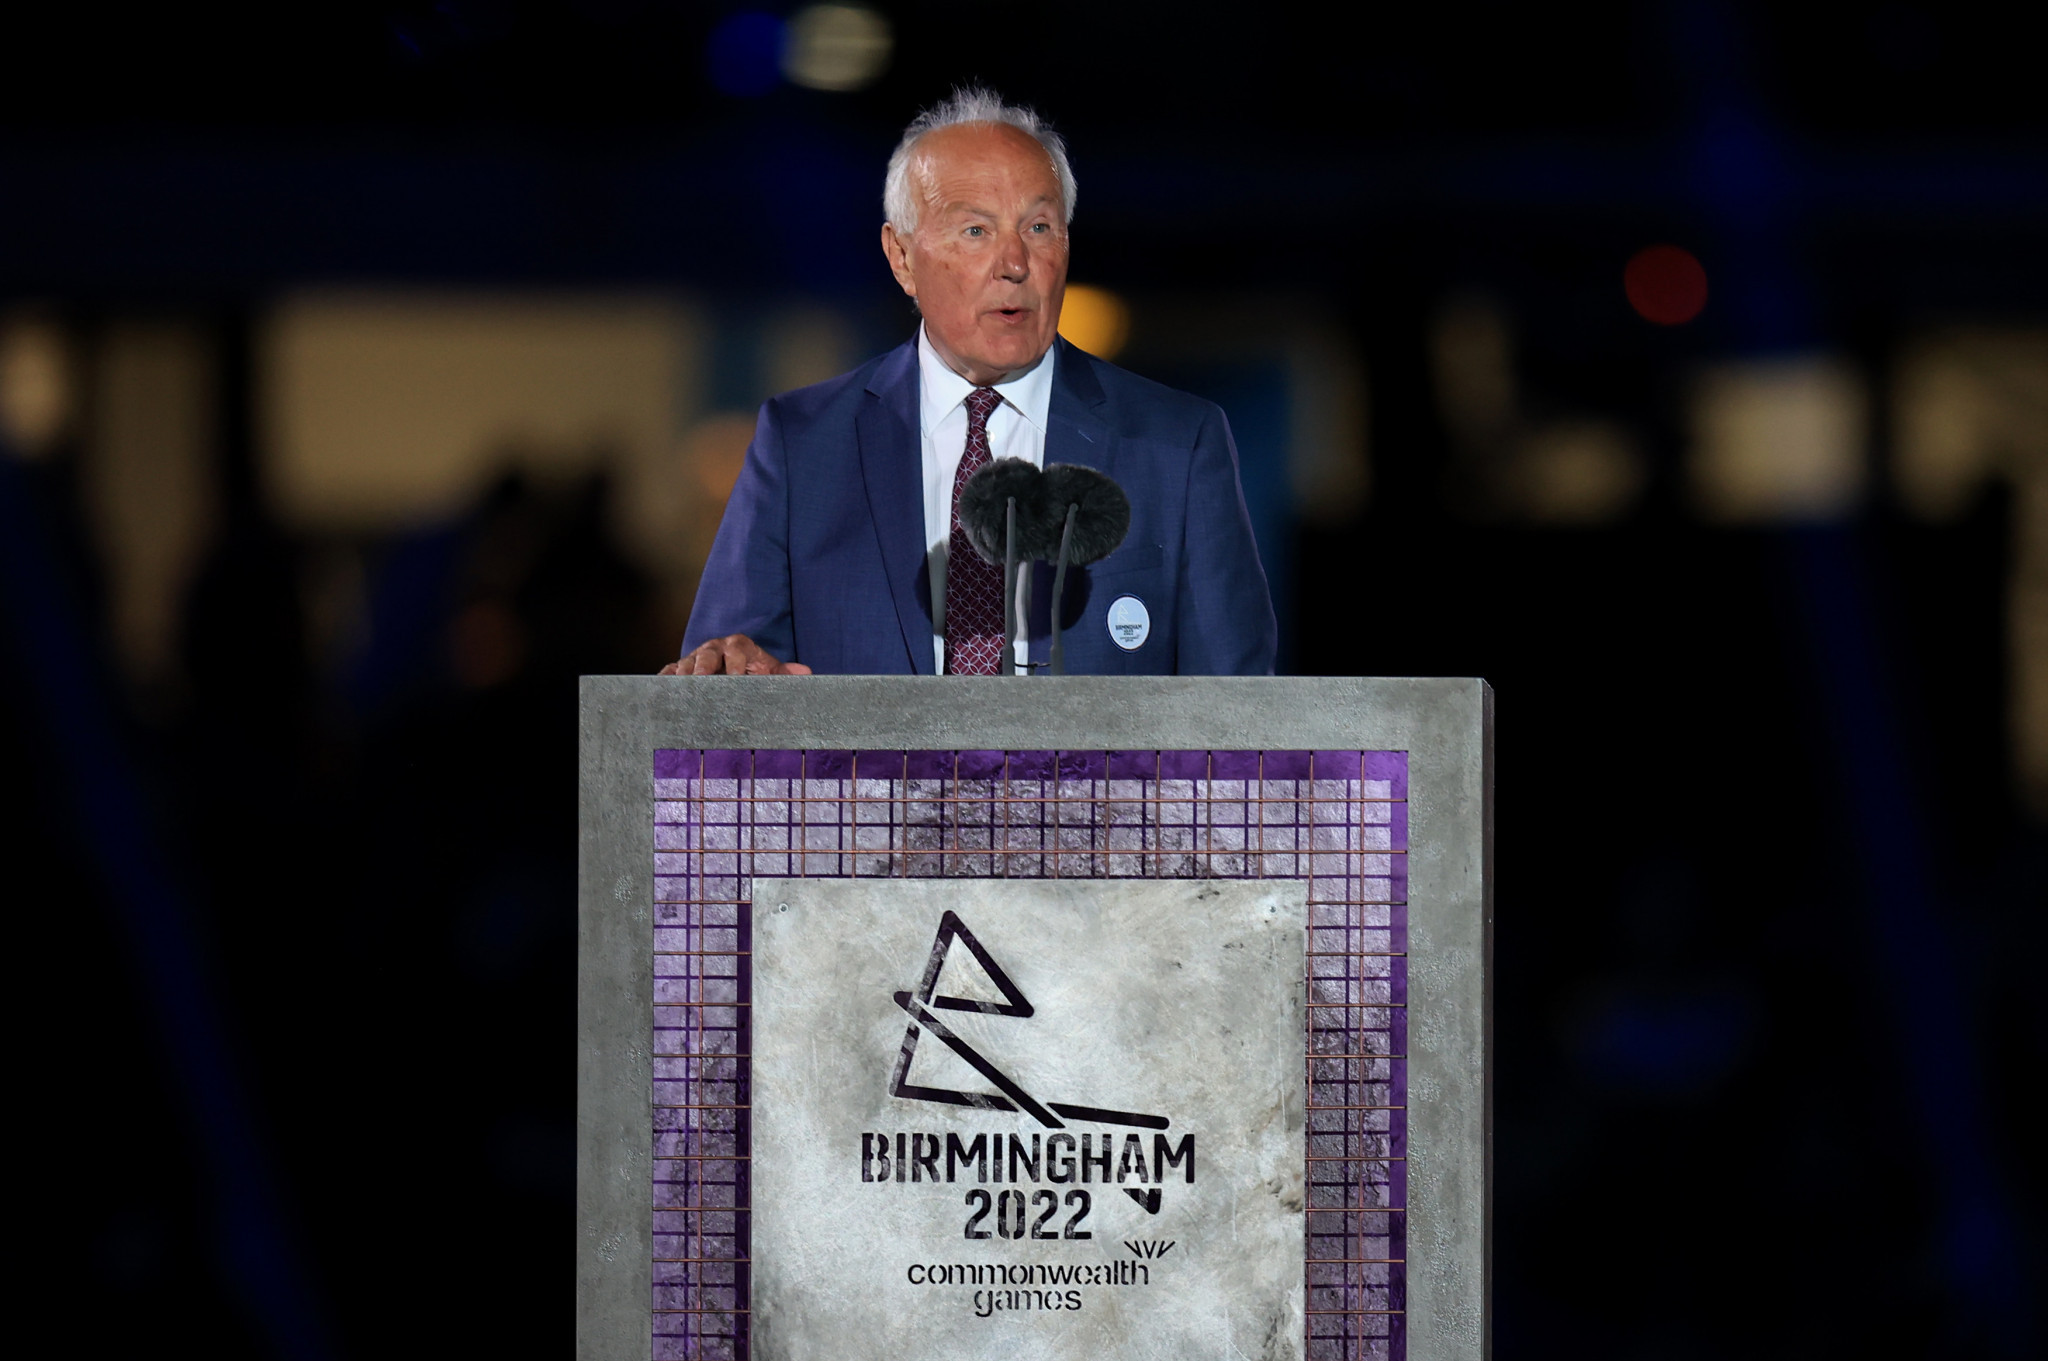 Chair of the Birmingham 2022 Organising Committee John Crabtree received a knighthood in the 2023 New Year Honours list ©Getty Images